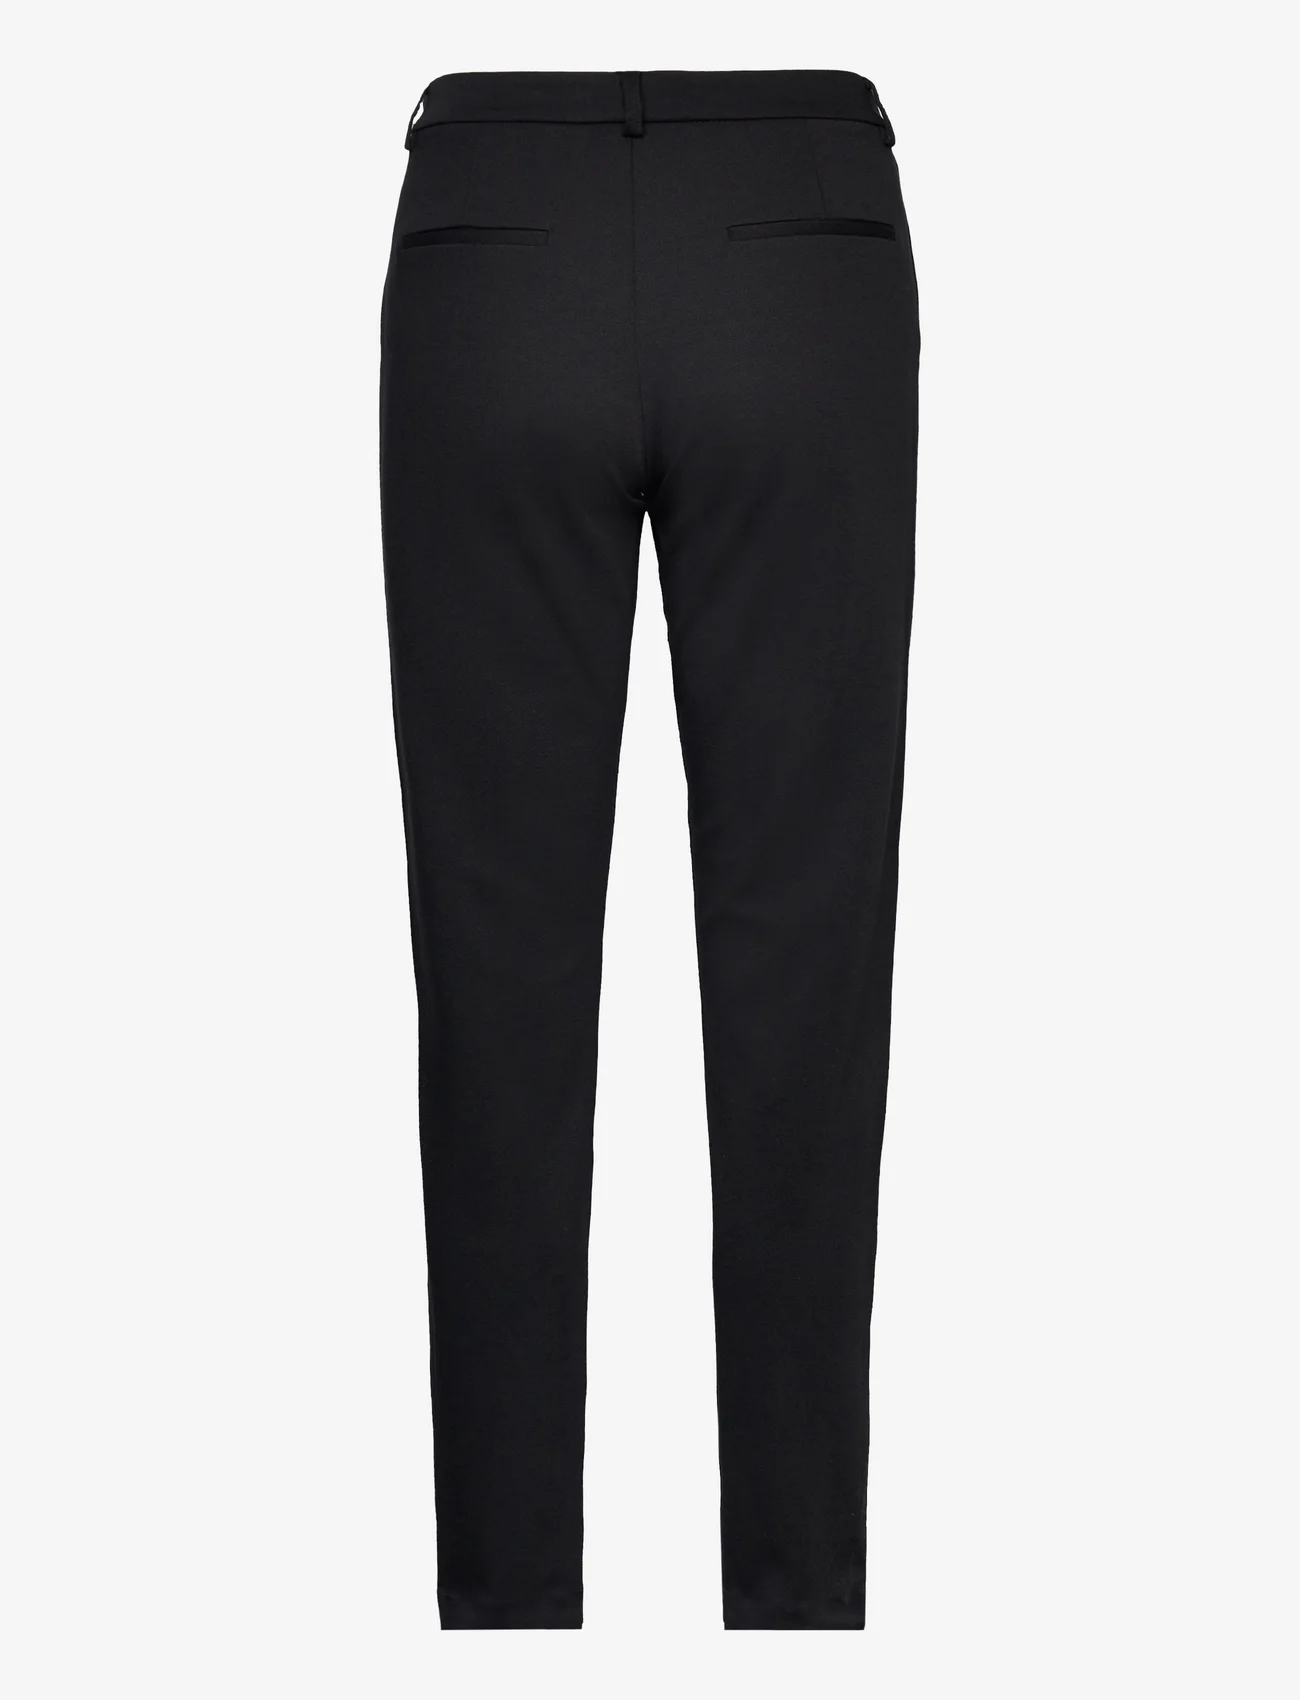 FREE/QUENT - FQNANNI-PANT - formell - black - 1